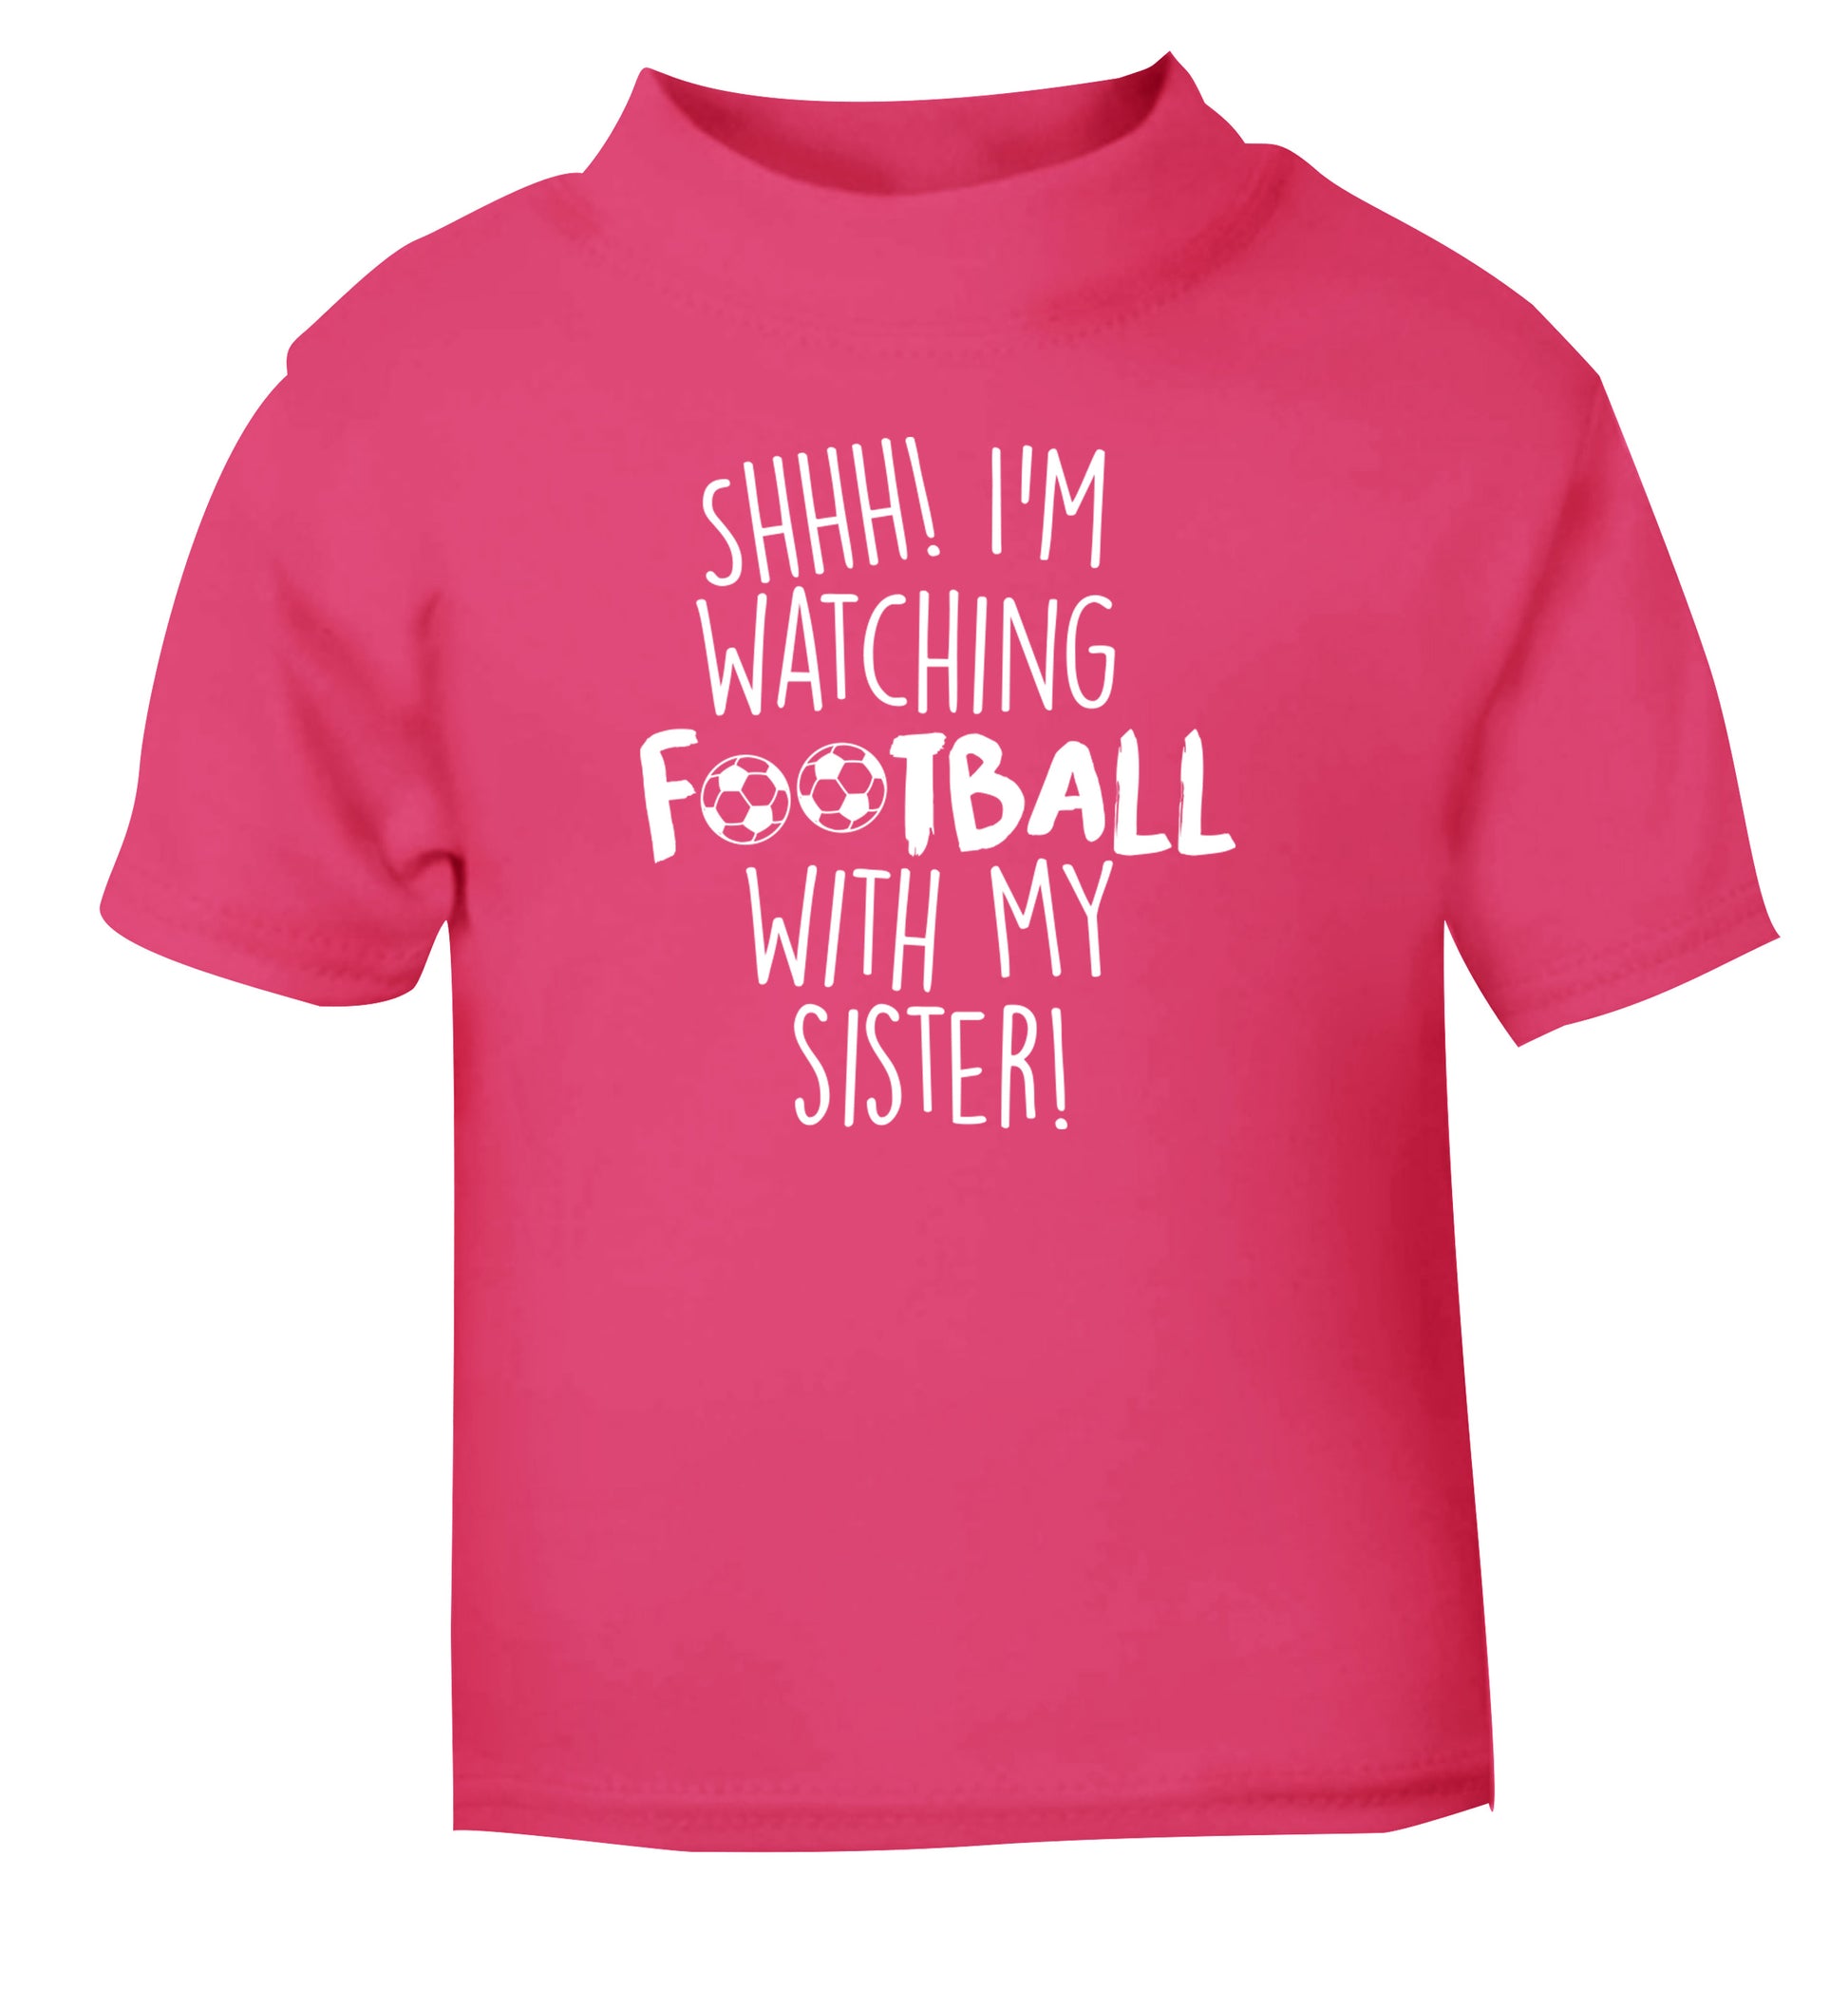 Shhh I'm watching football with my sister pink Baby Toddler Tshirt 2 Years